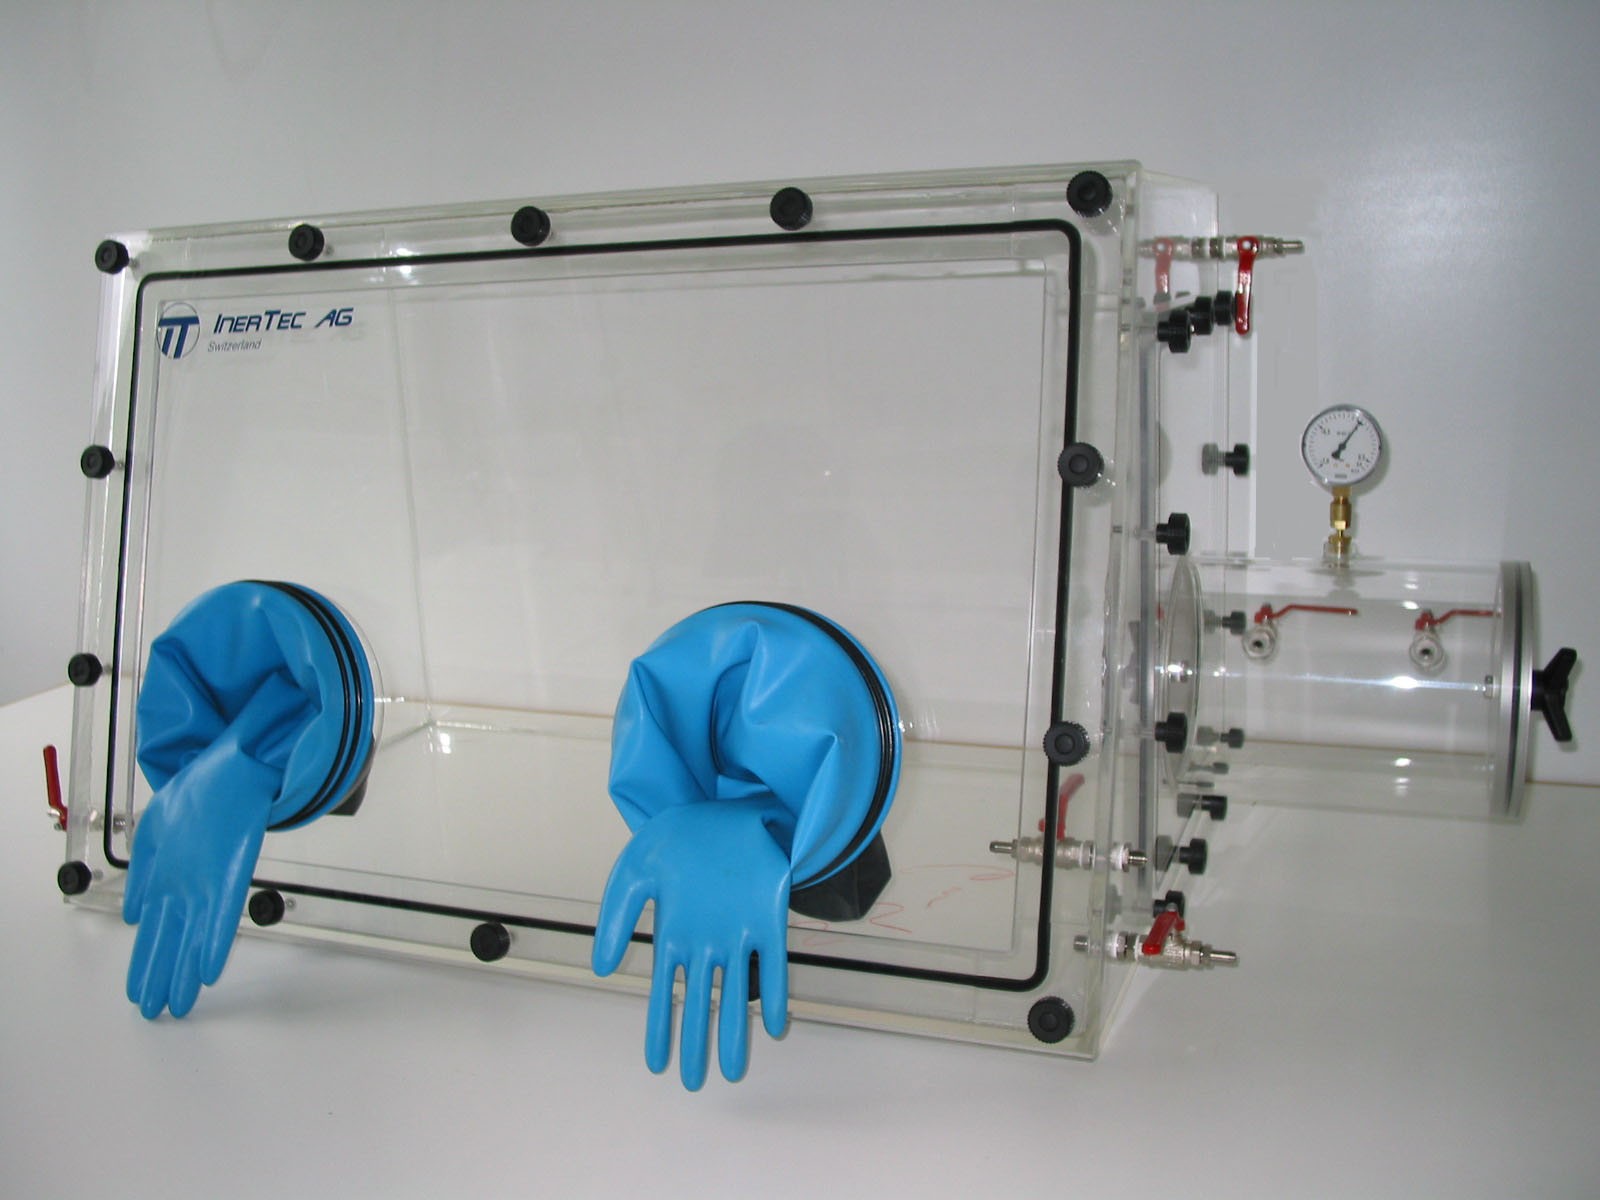 Glovebox made of acrylic&gt; Gas filling: automatic flushing with pressure control, front version: standard, side version: hinged doors Control: oxygen regulator with humidity display